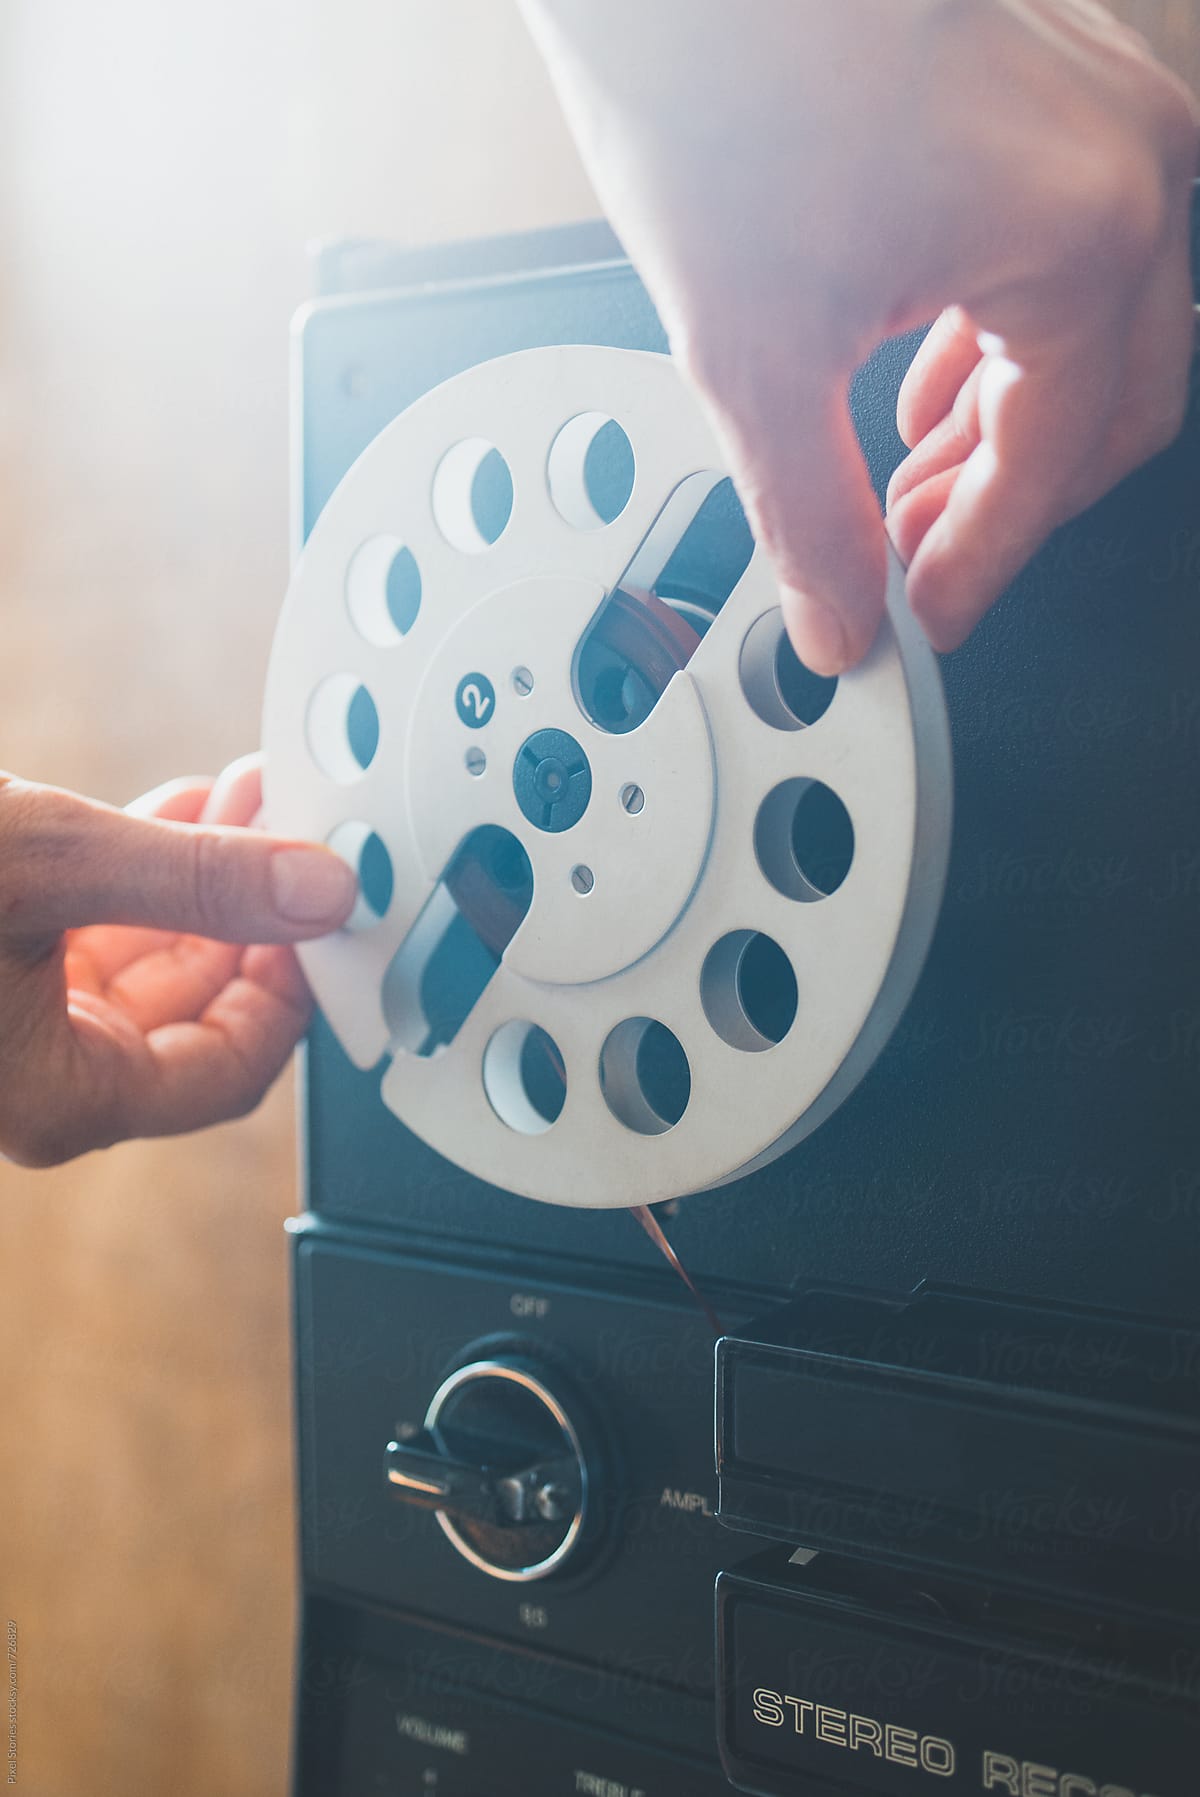 Person placing a reel on a reel-to-reel tape recorder